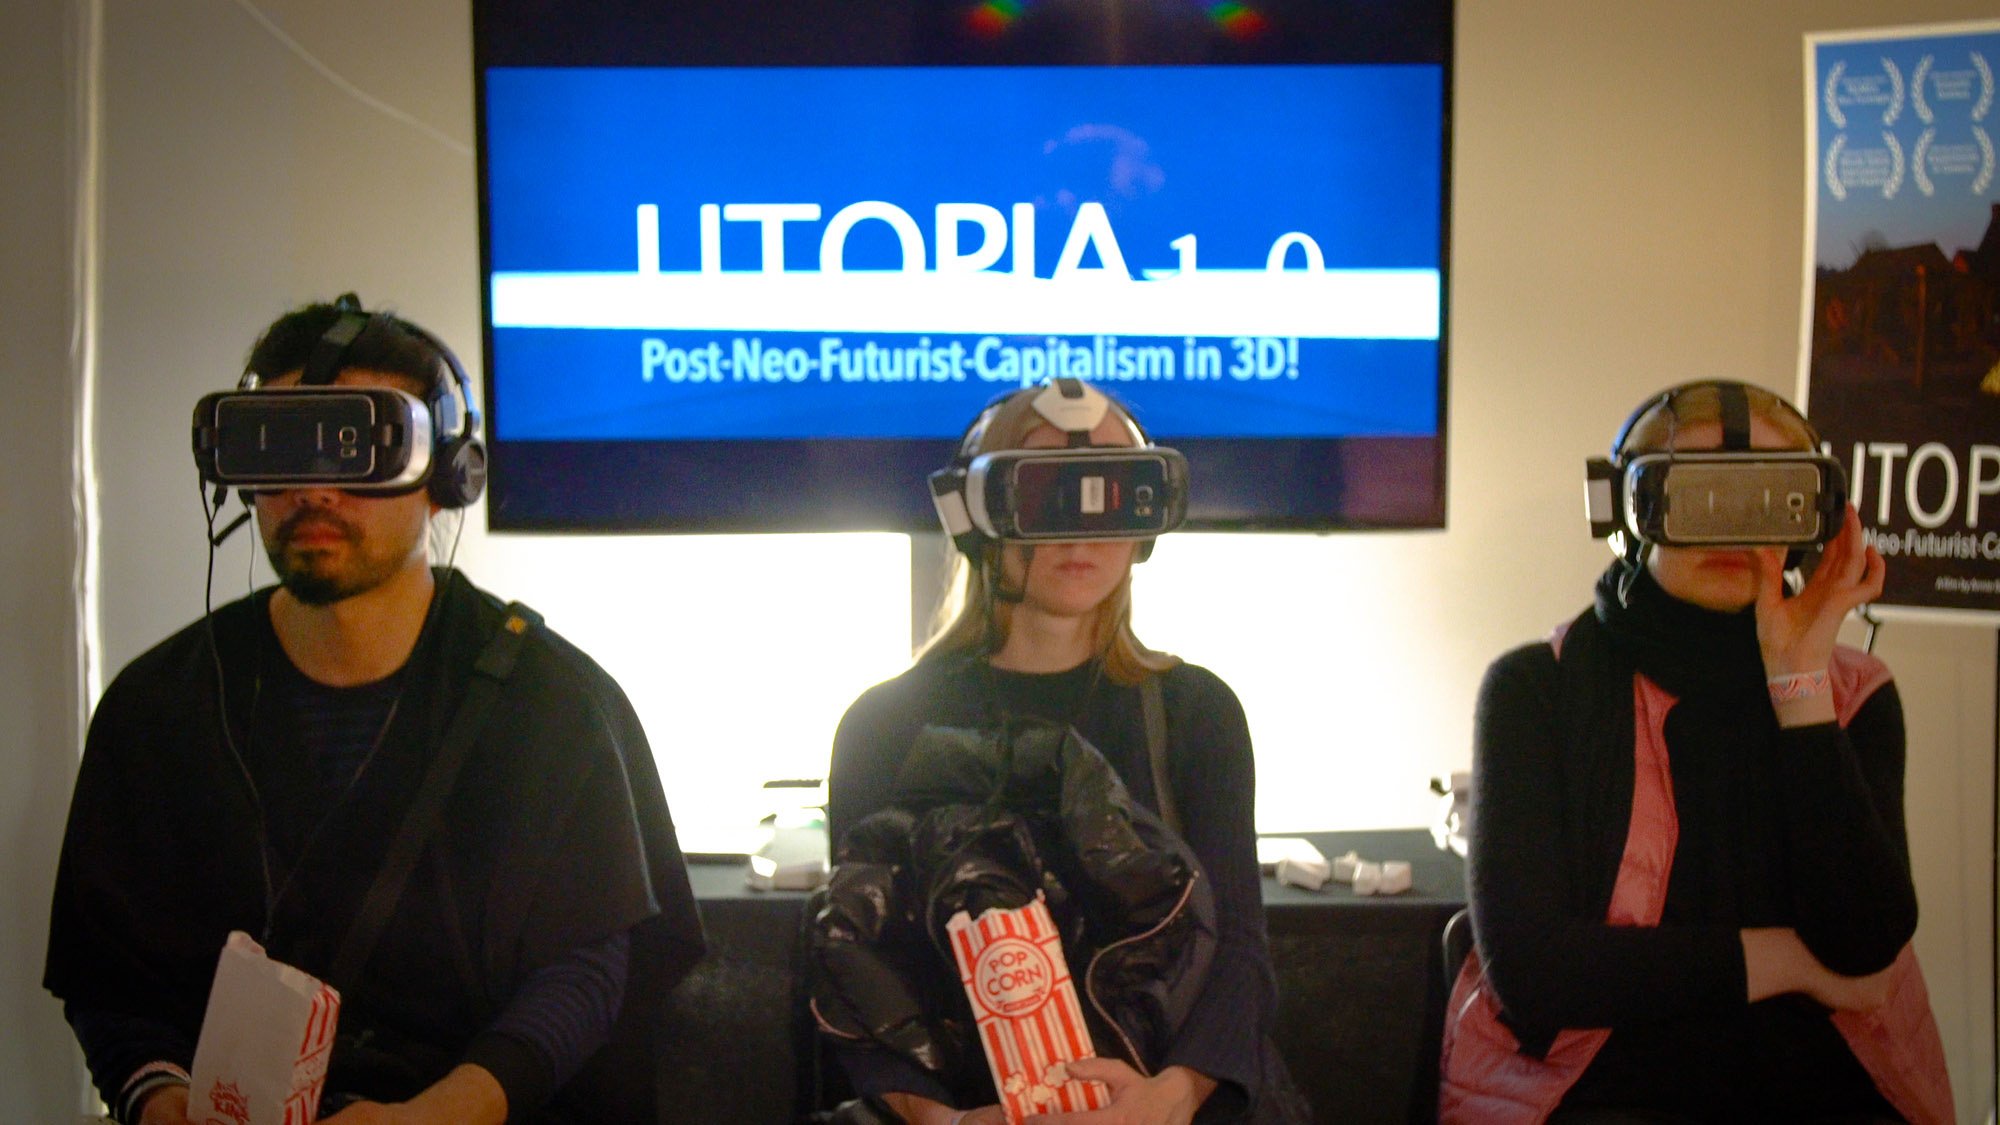 Three people wearing VR headgear in front of the UTOPIA logo